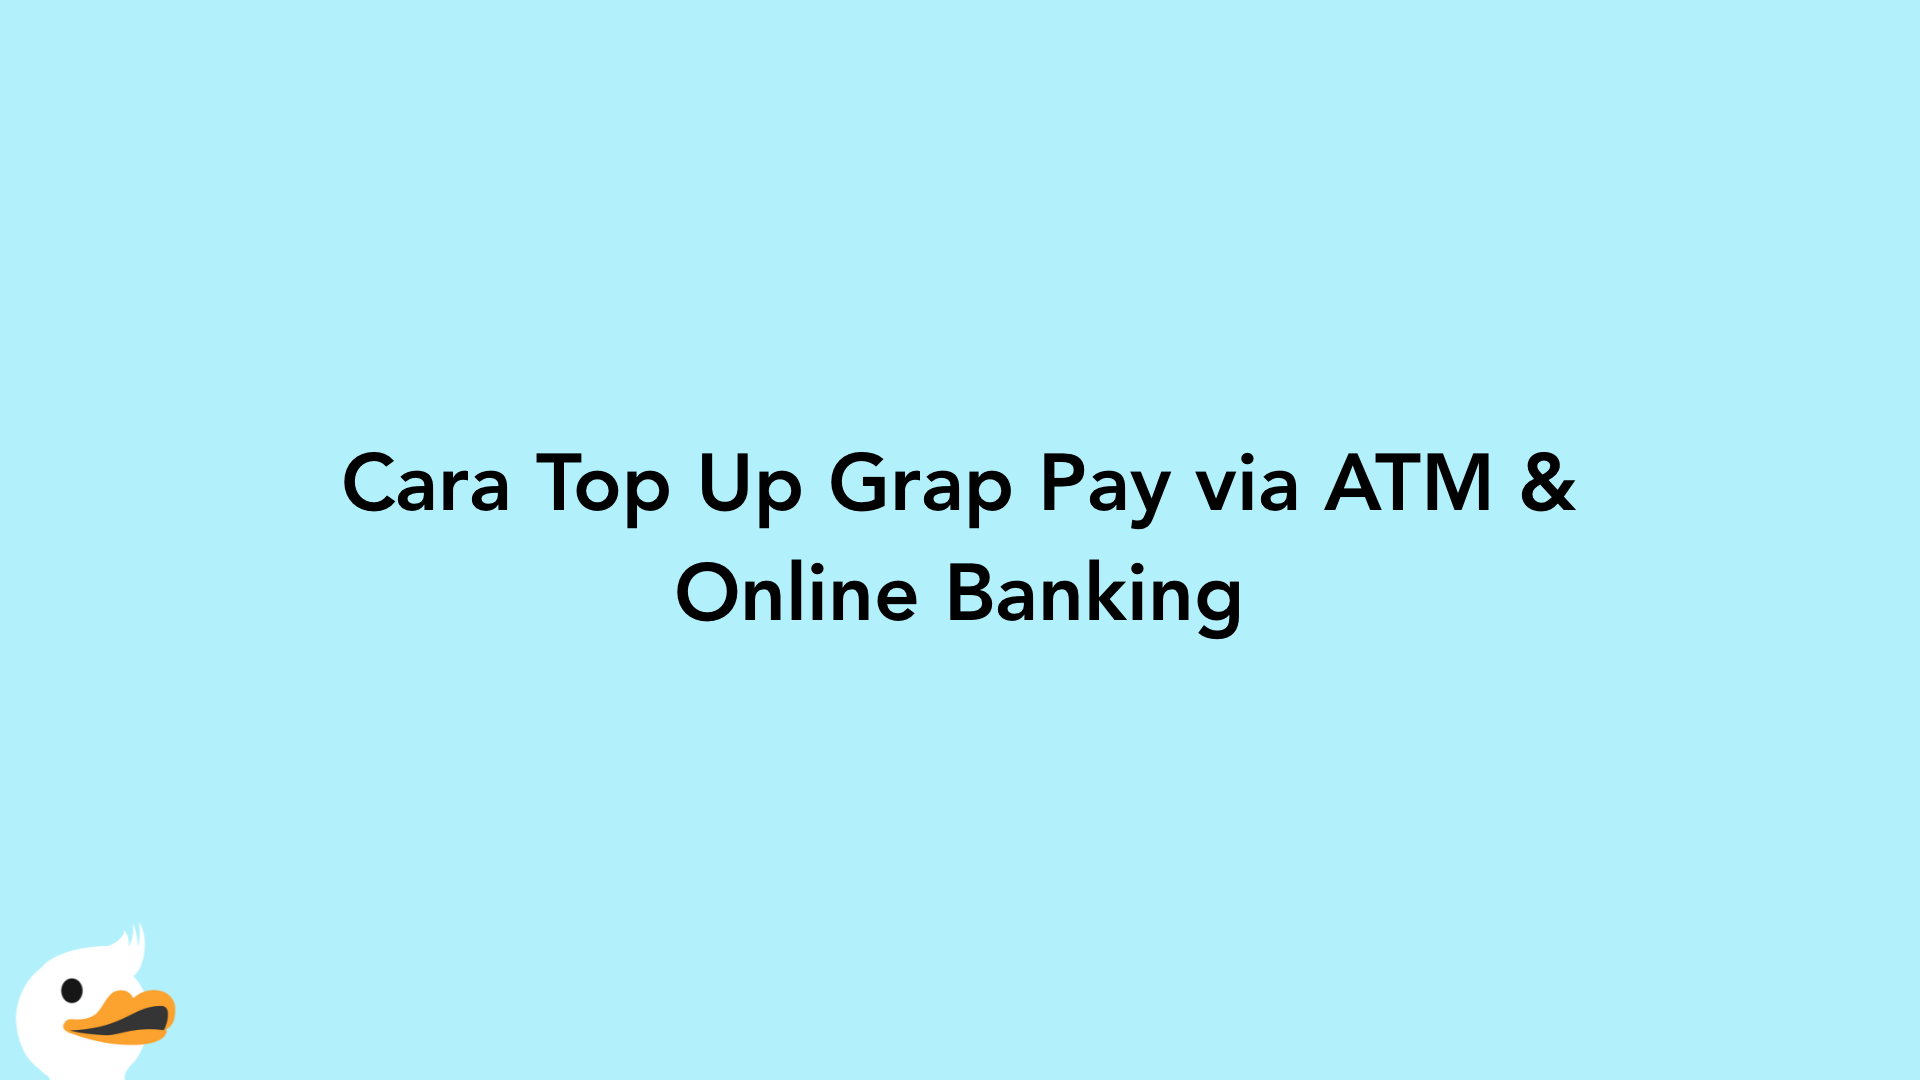 Cara Top Up Grap Pay via ATM & Online Banking